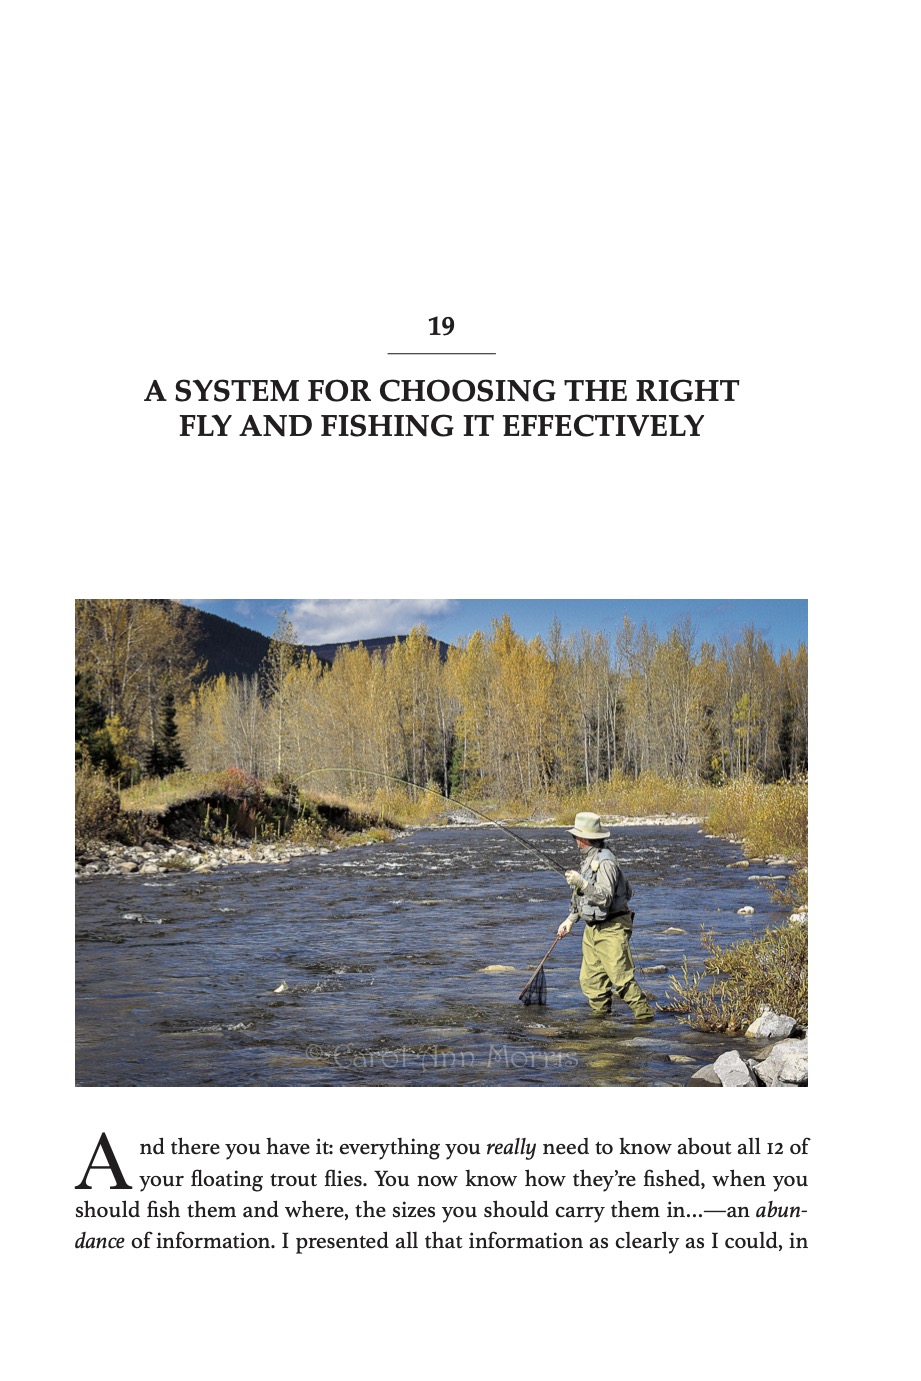 Top 12 Dry Flies for Trout Streams: How, When, and Where to Fish Them by Skip Morris, sample chapter page